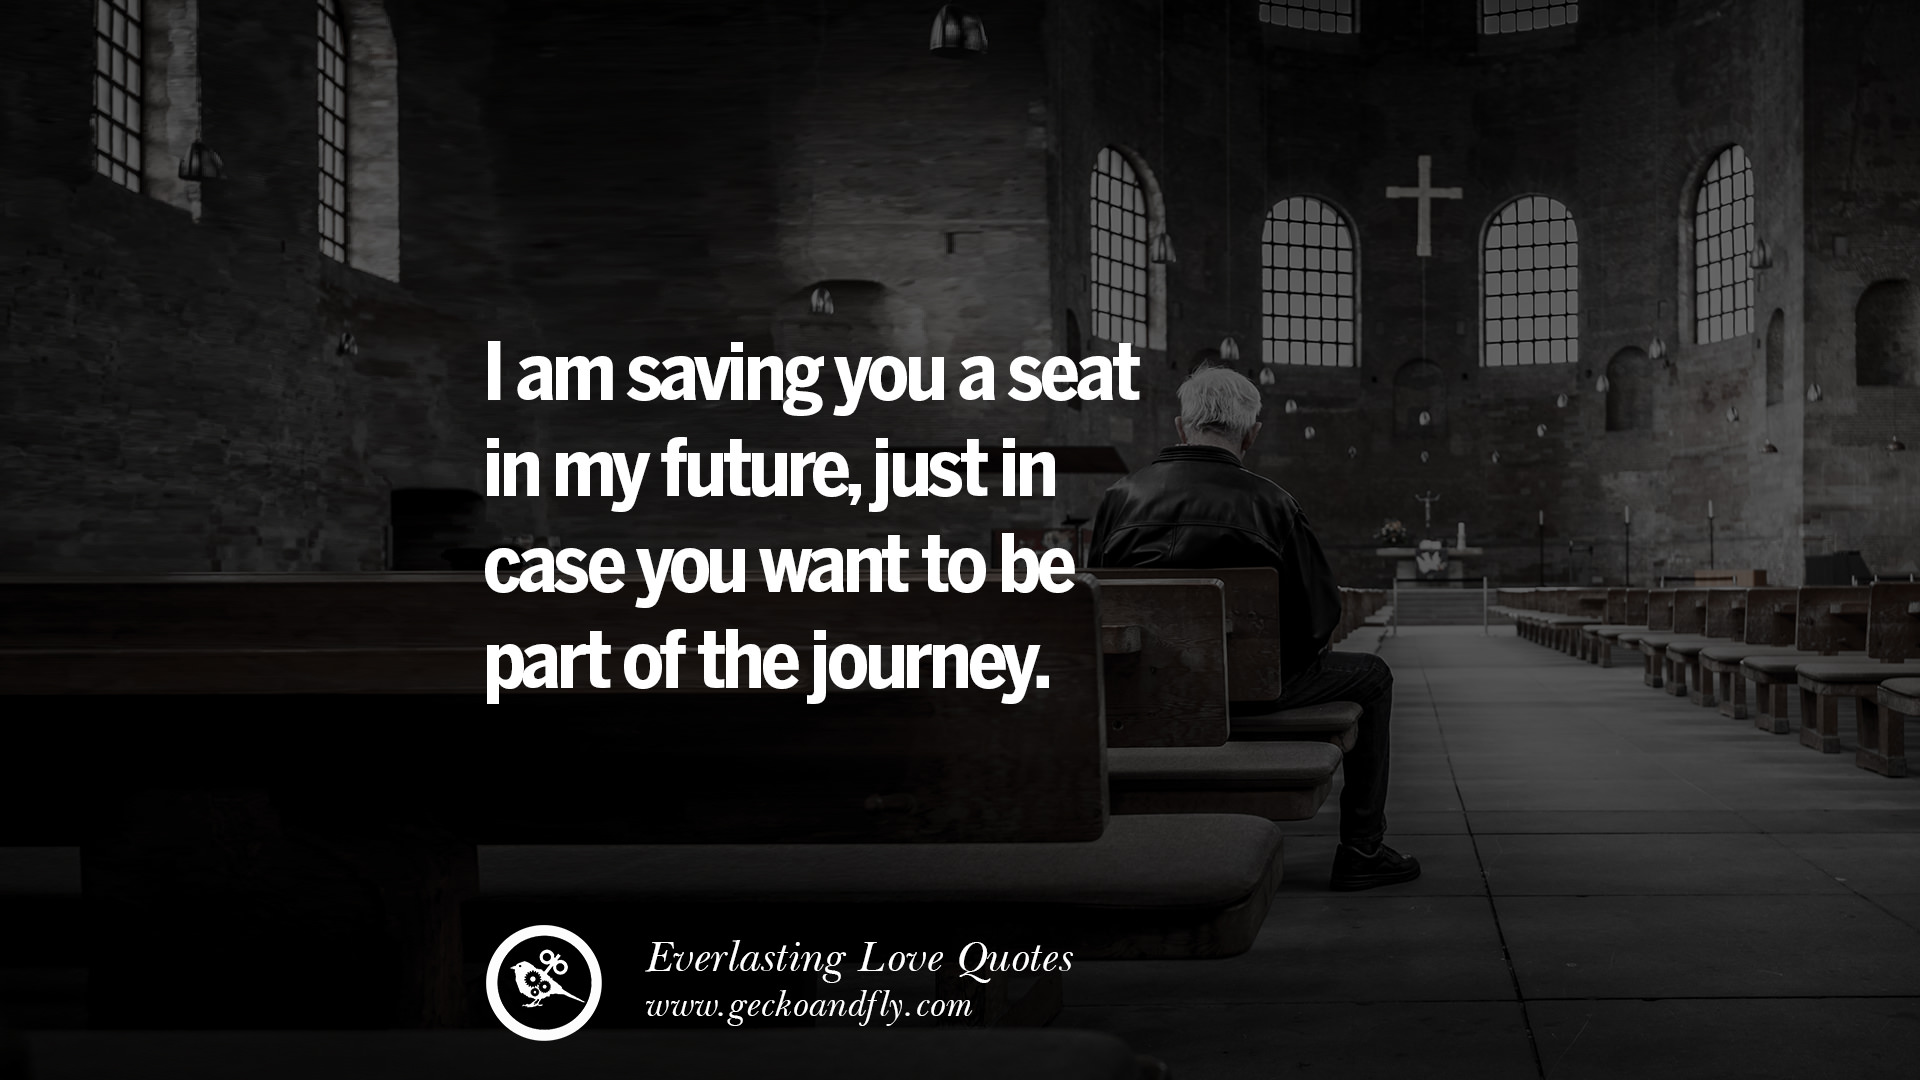 I am saving you a seat in my future just in case you want to